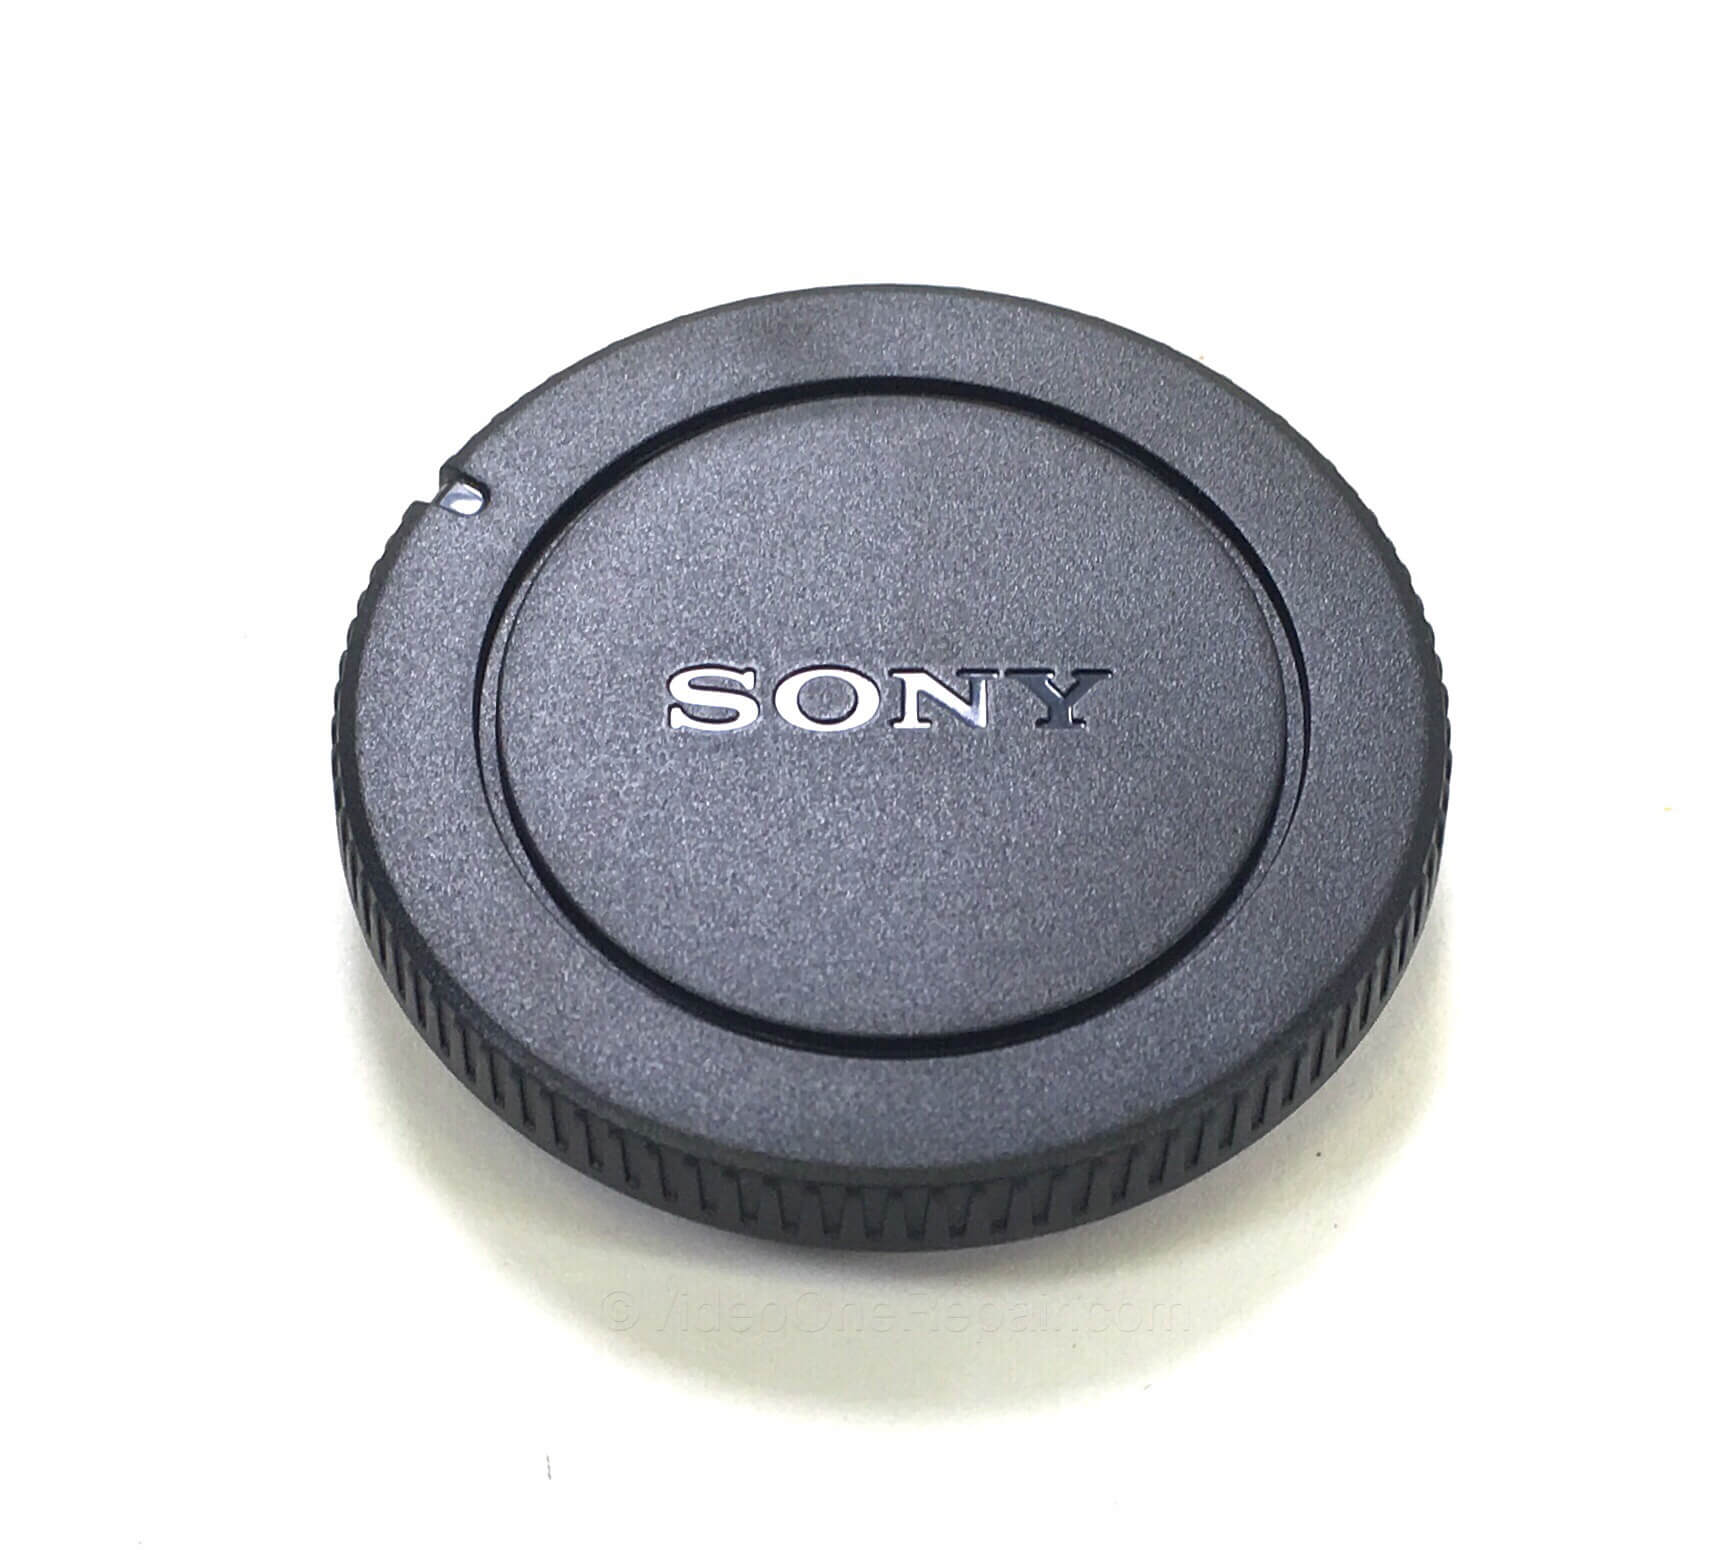 Original Sony PXW-FS5 Grip Cover that fits on the the Sony PXW-FS5 camcorder. It covers the body where the grip attaches. It is a genuine Sony part, sourced directly from Sony USA. Brand new factory fresh. Free Shipping.